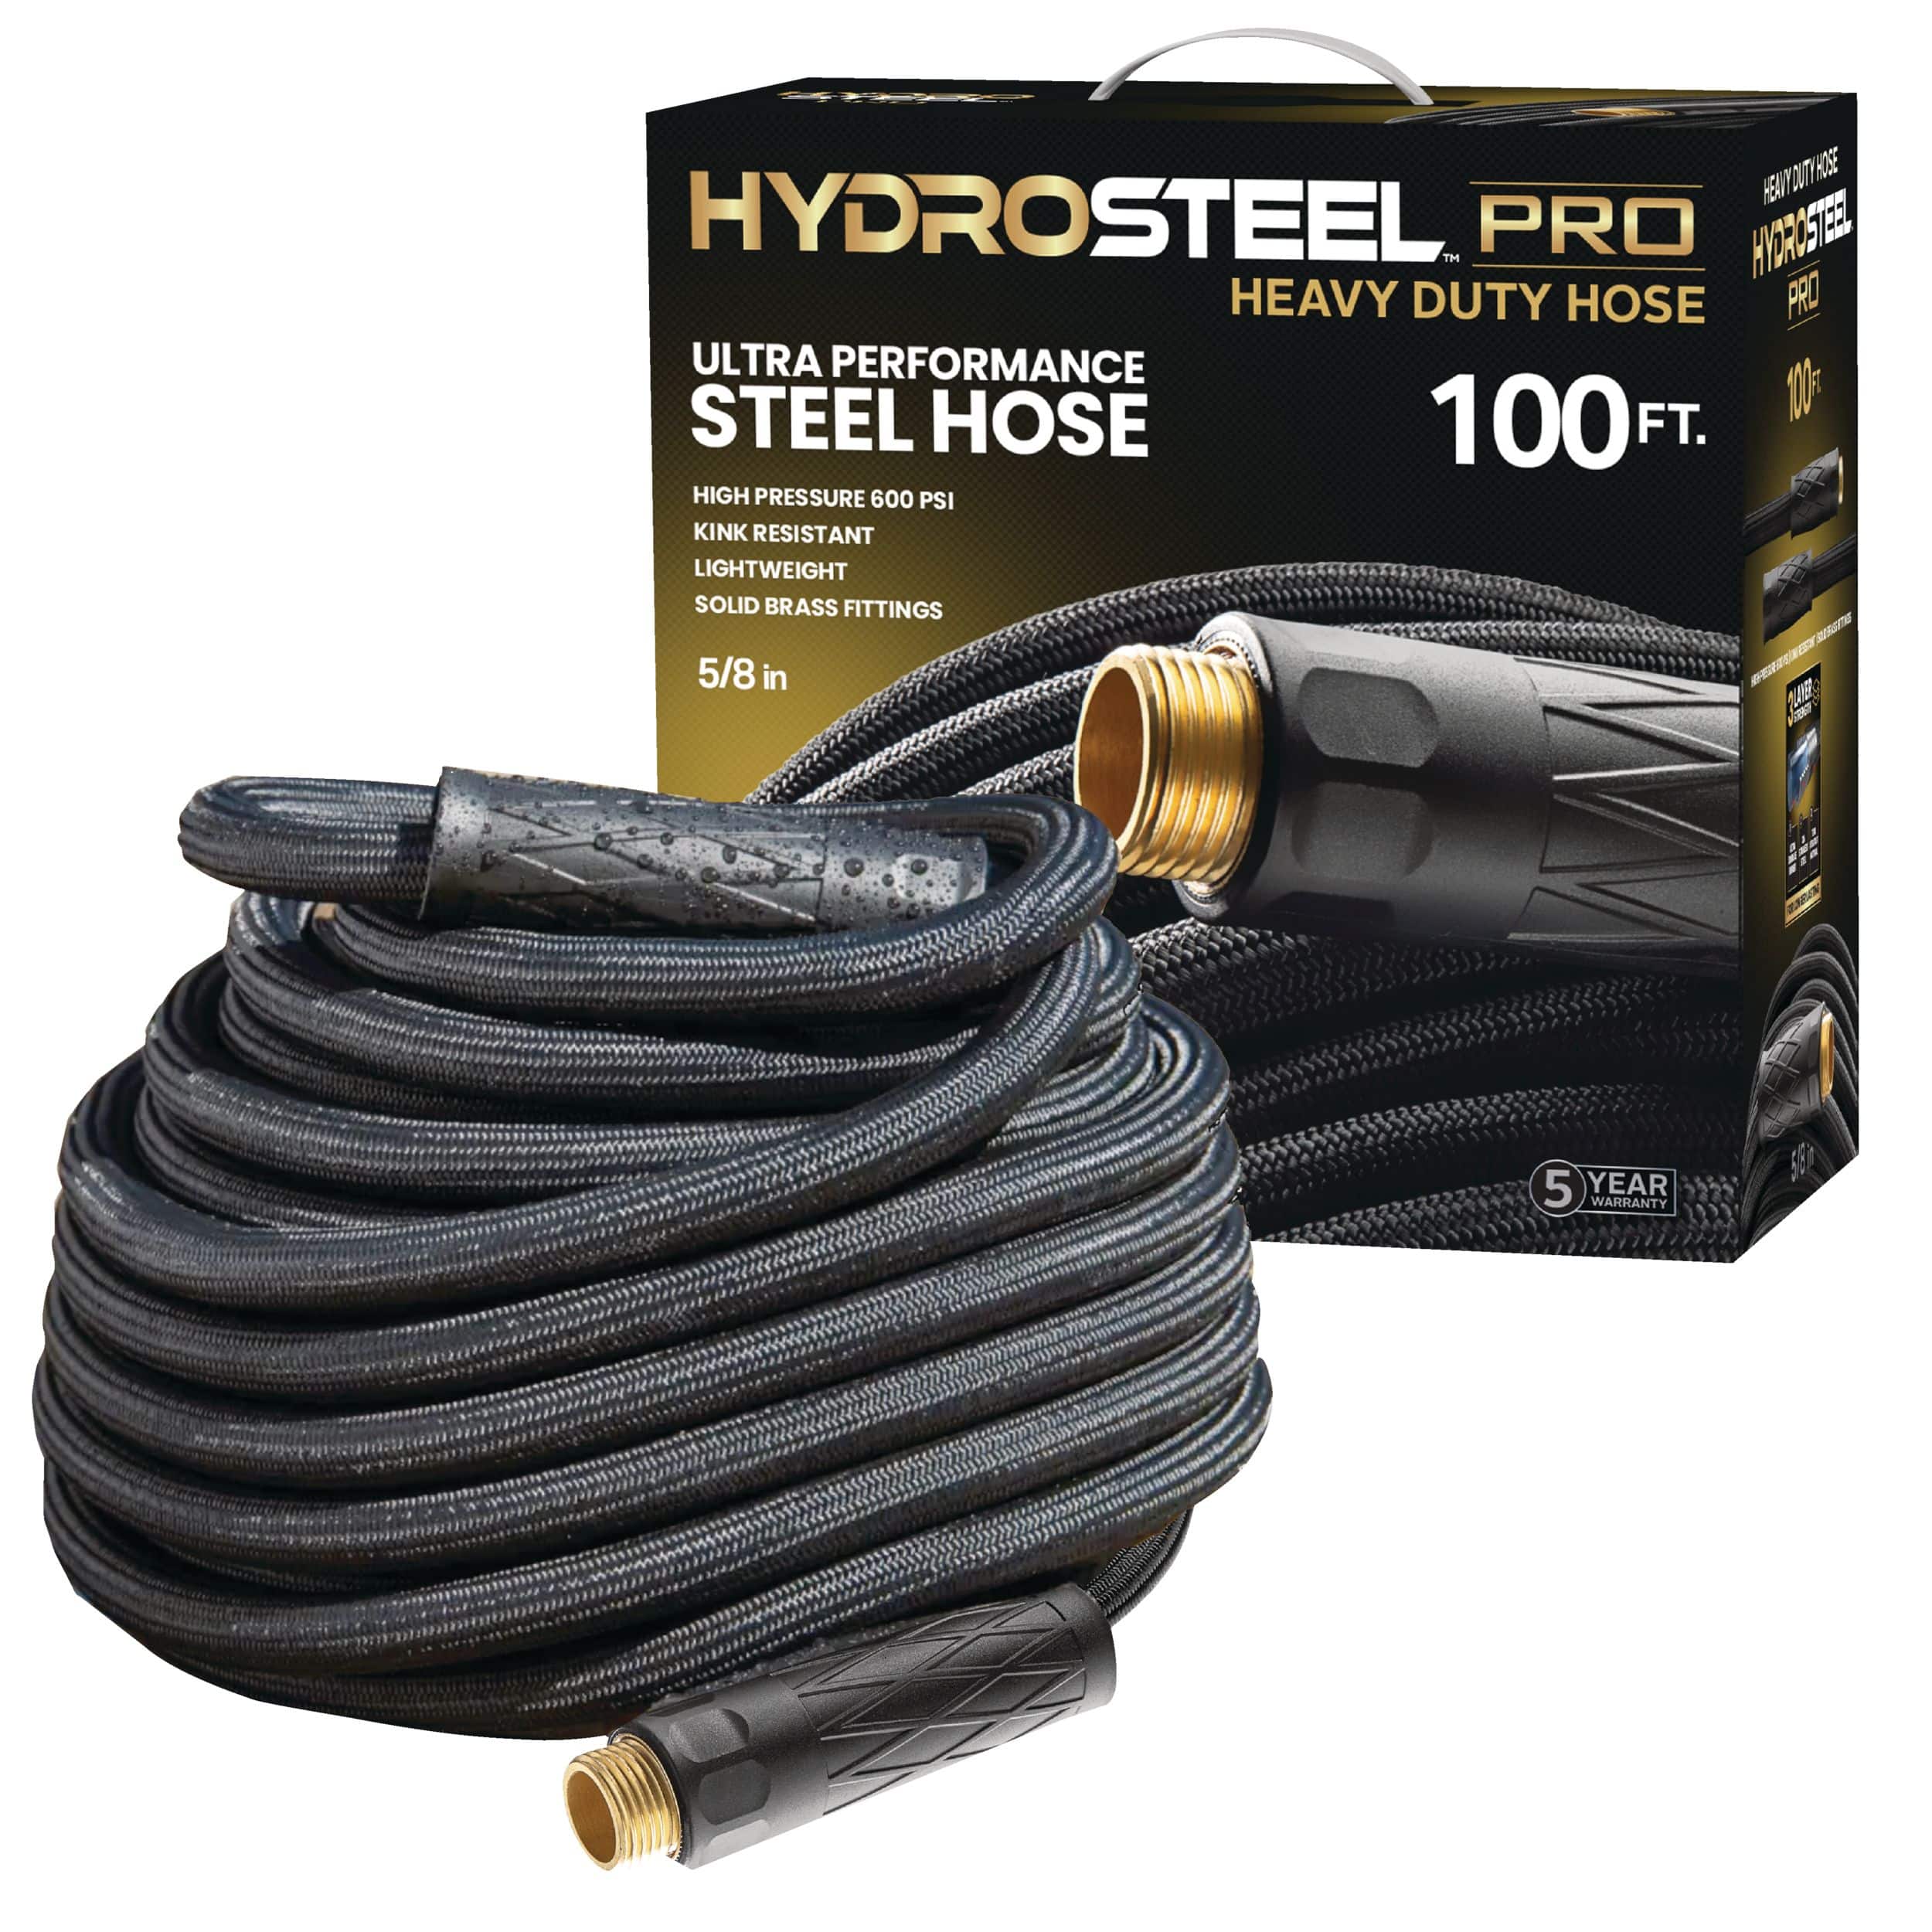 2 layers reinforced rubber hose,air hose,water hose